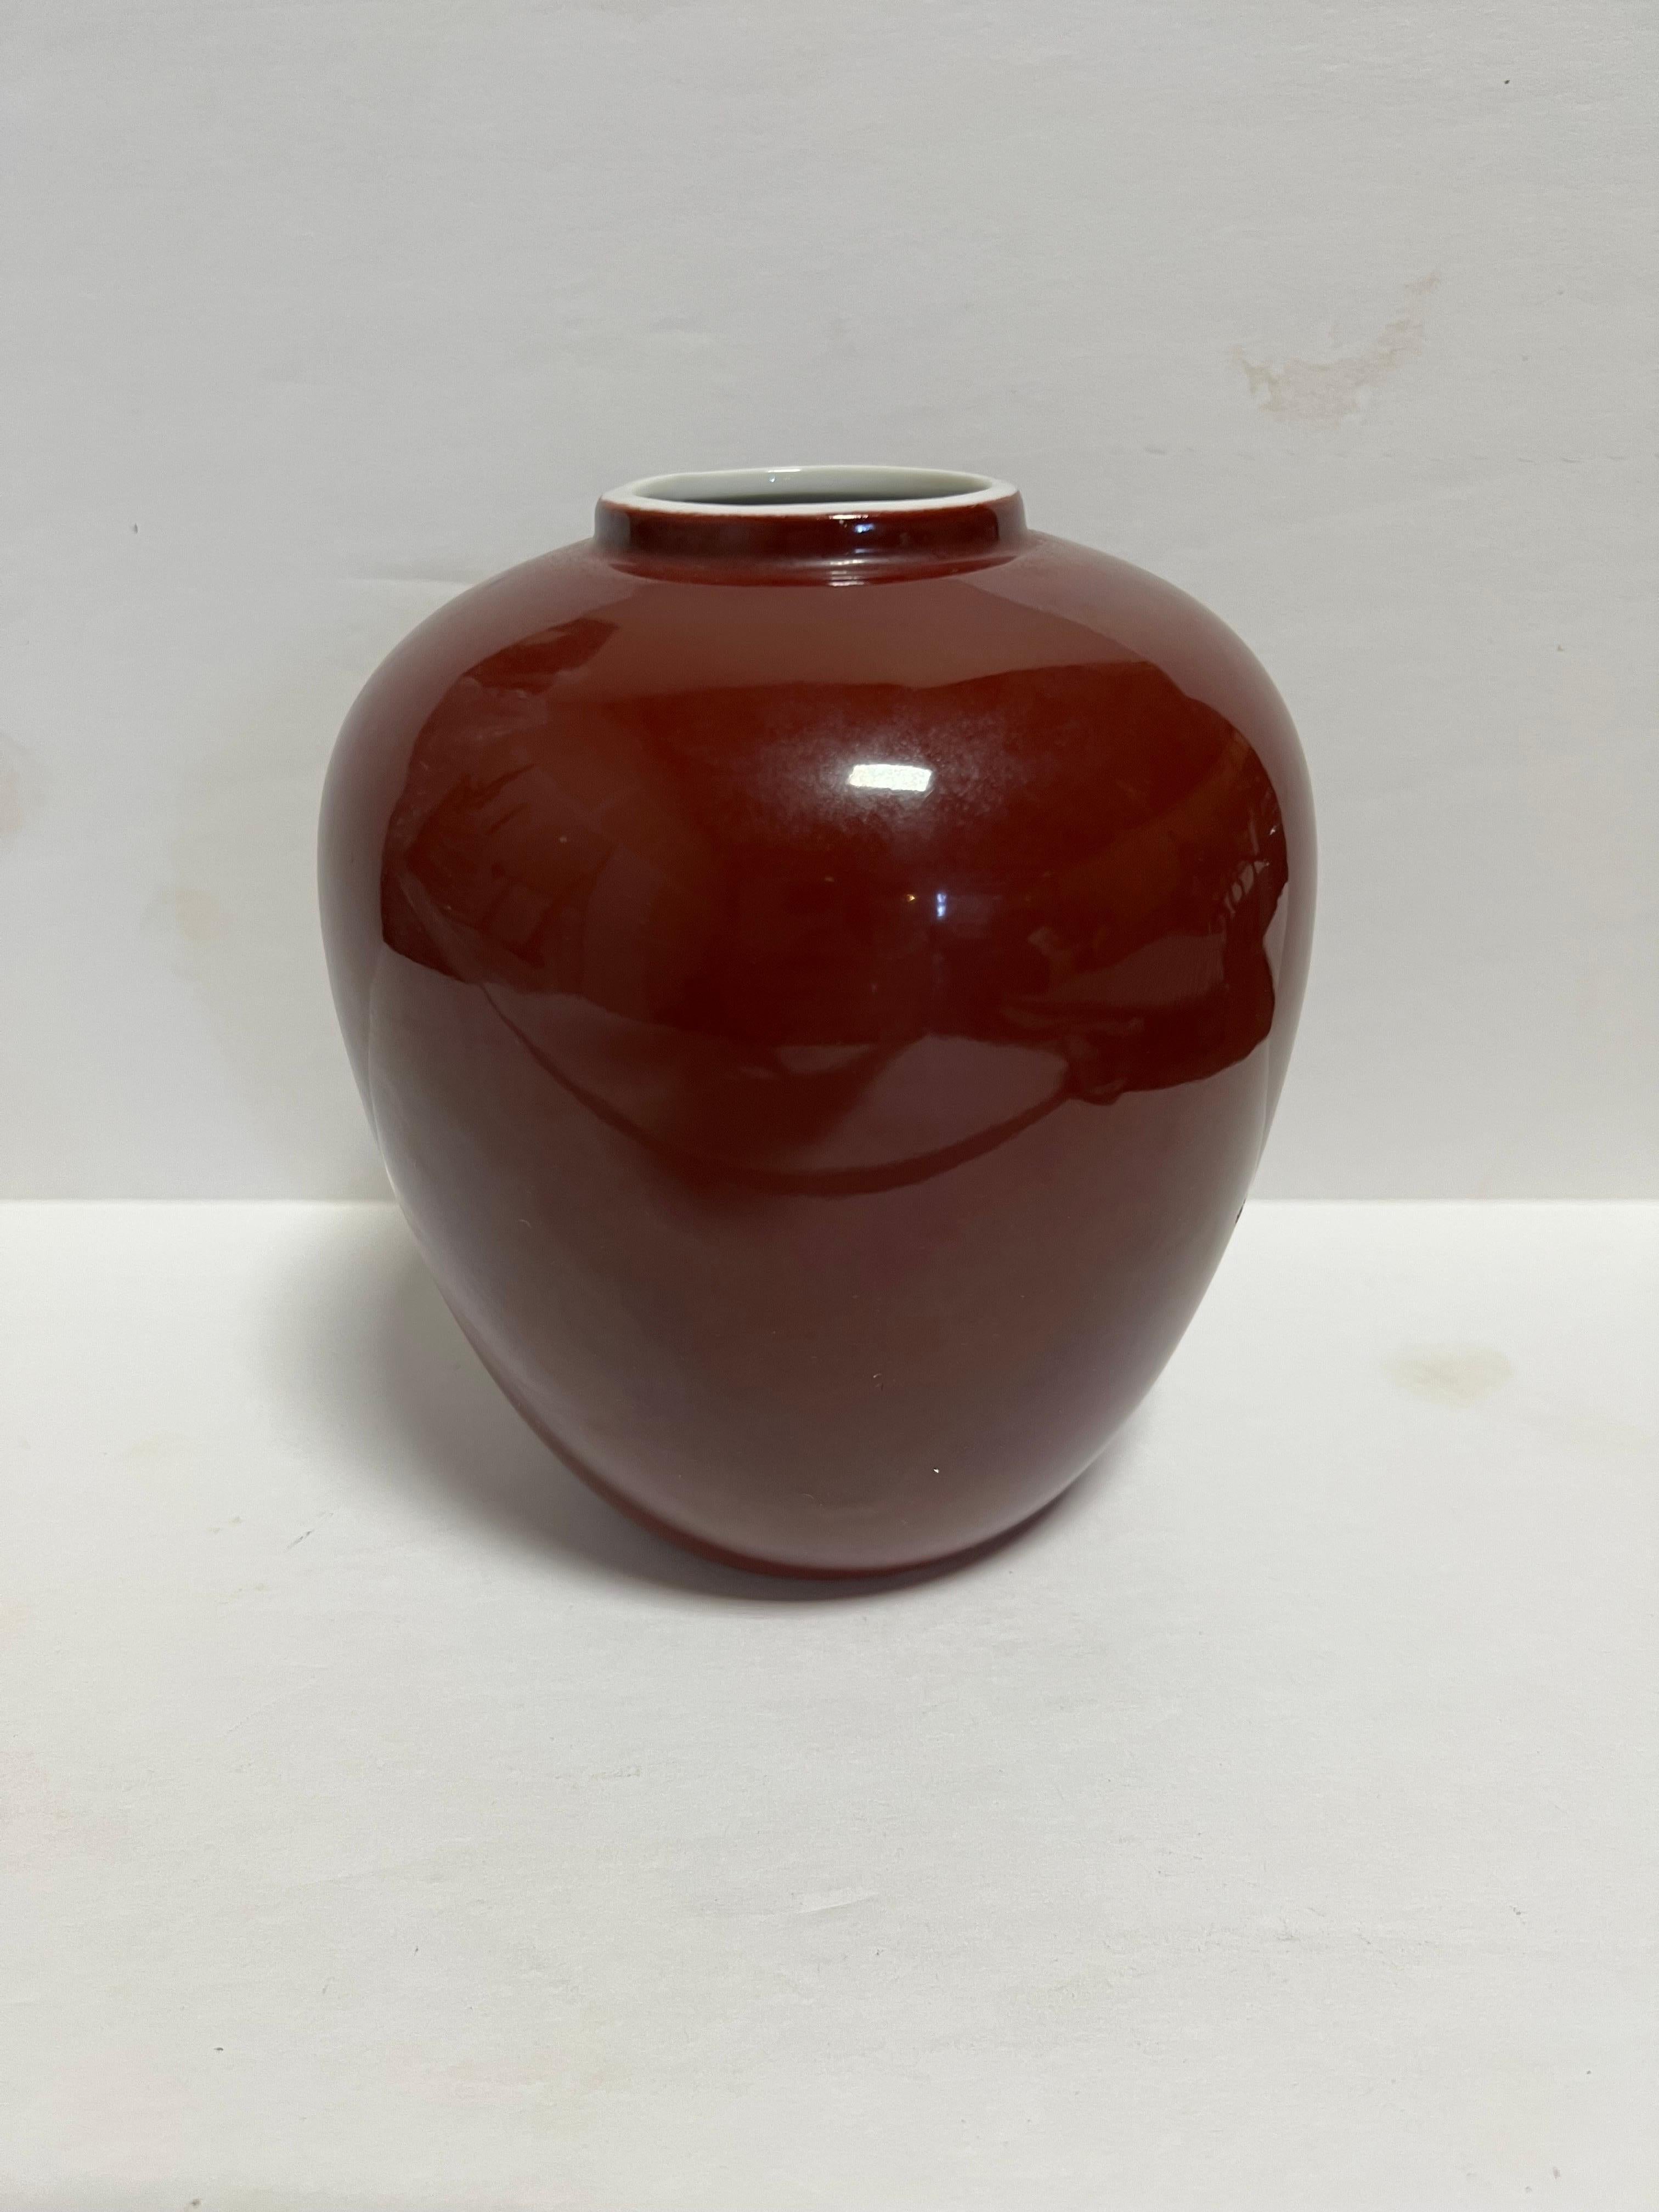 Oxblood red shoulder vase with white interior by Diane Love by Mikasa.

Signed.

Japan, circa 1980.

Dimensions: 6.25” H x 5.5” W